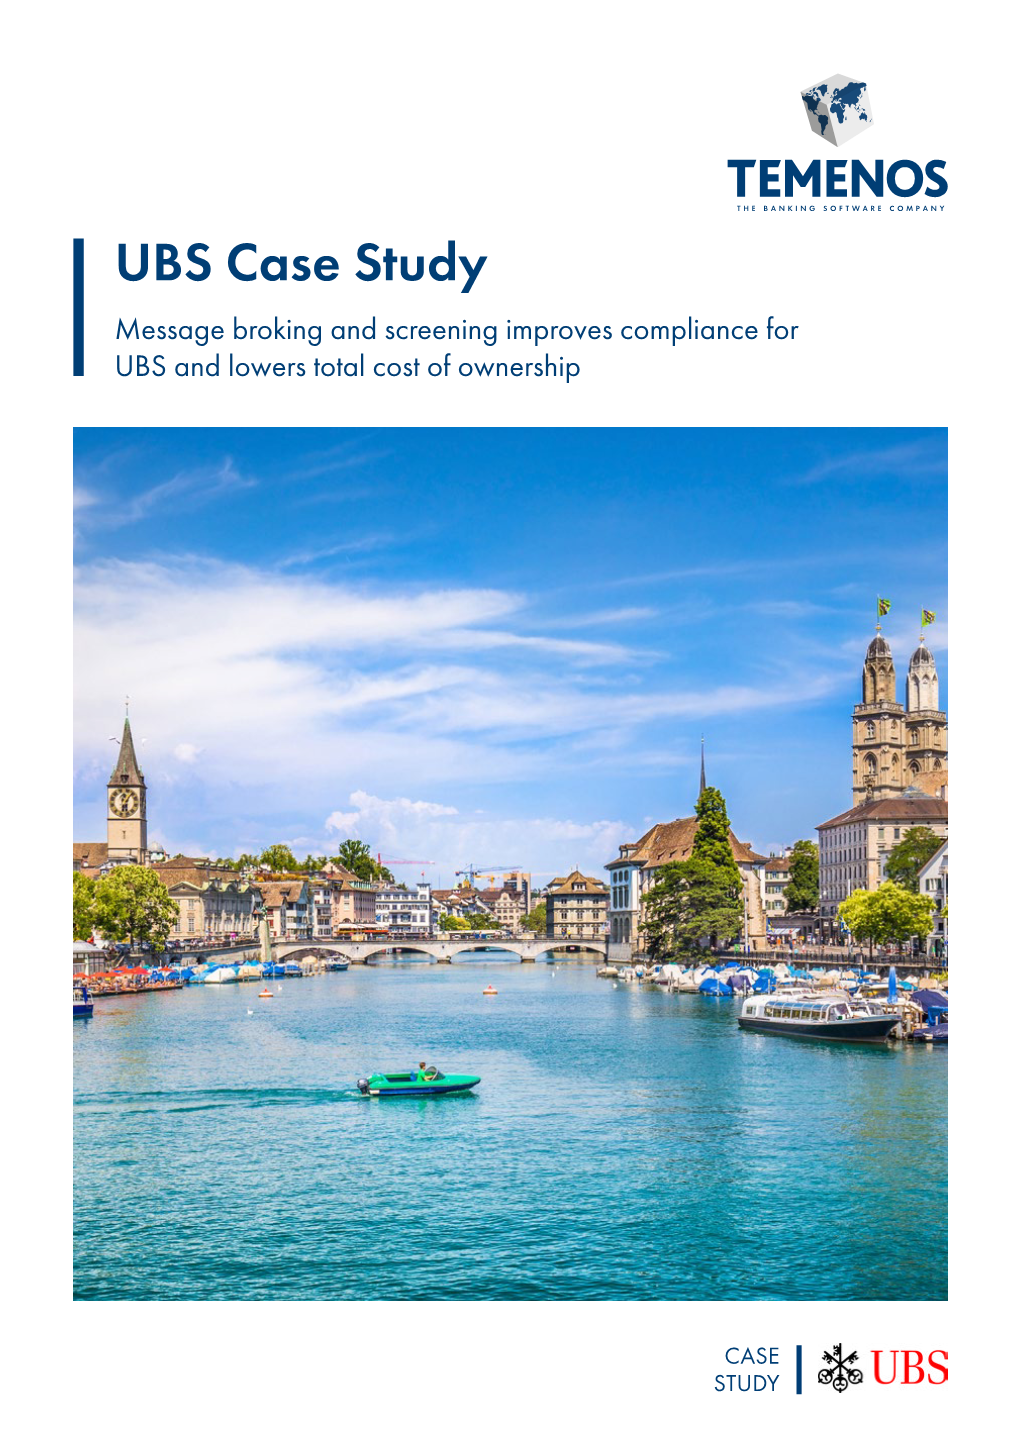 UBS Case Study Message Broking and Screening Improves Compliance for UBS and Lowers Total Cost of Ownership